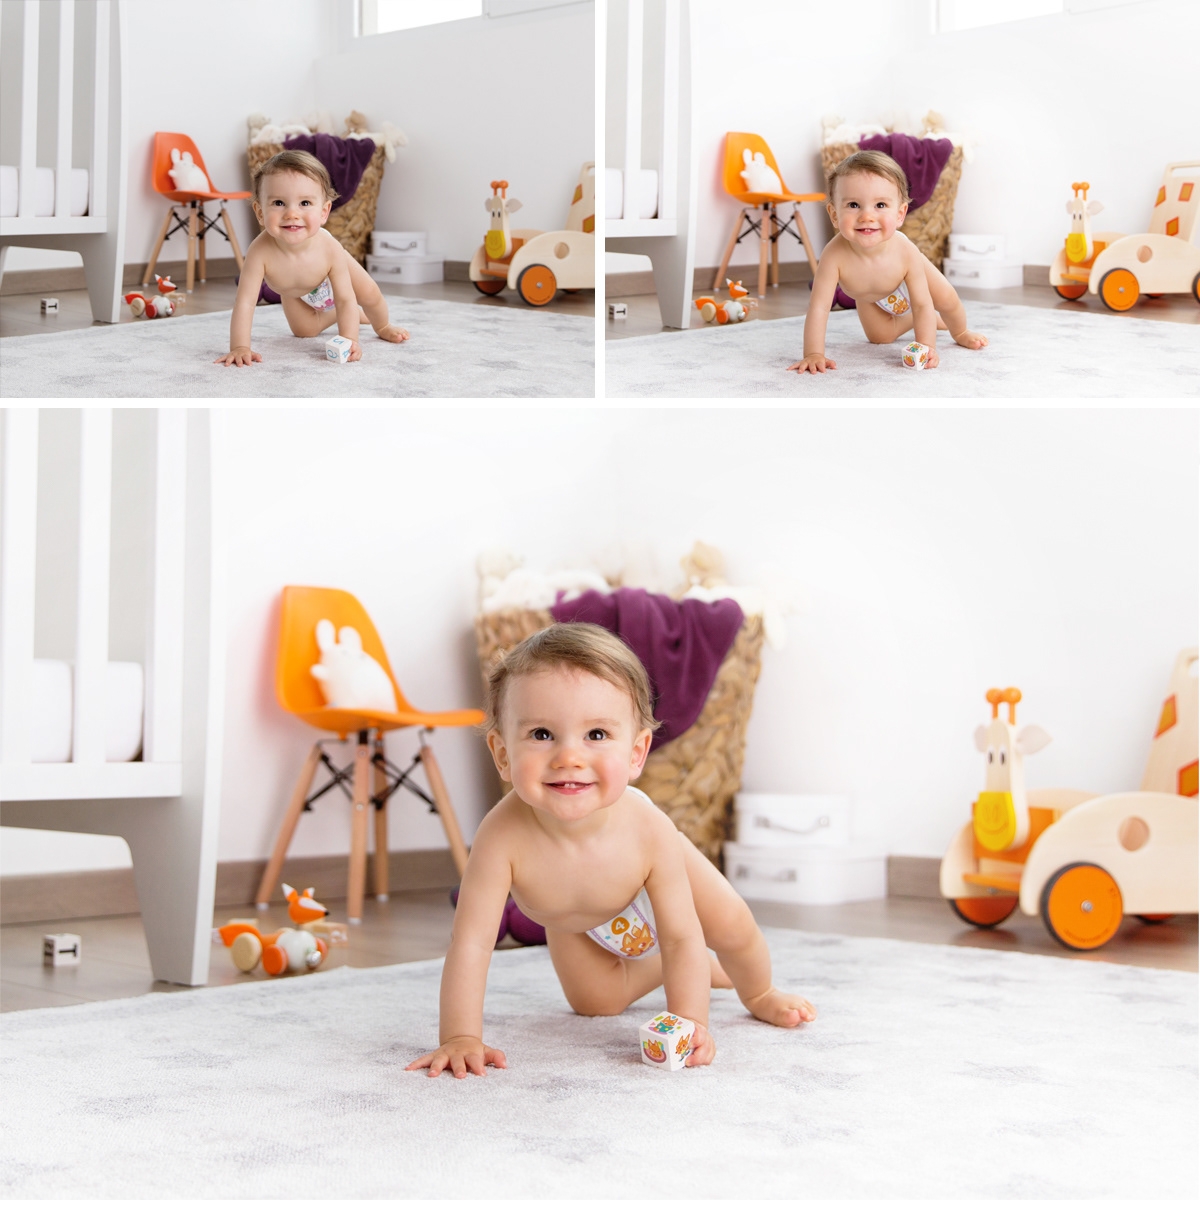 Packaging branding  re branding Editing  Photography  photo retouch diapers couches bimbies